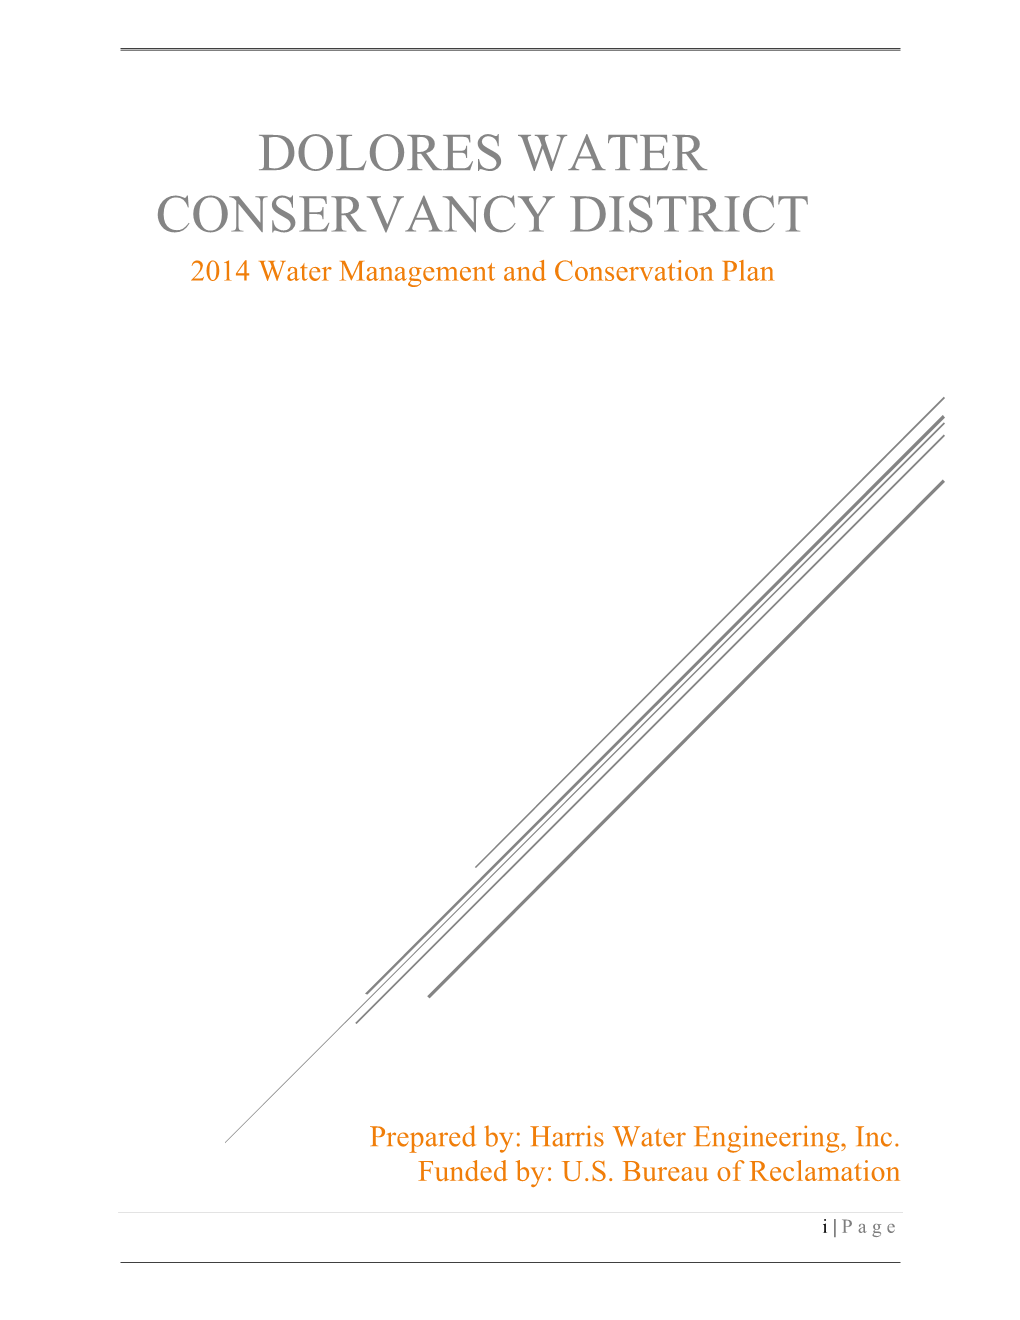 DOLORES WATER CONSERVANCY DISTRICT 2014 Water Management and Conservation Plan